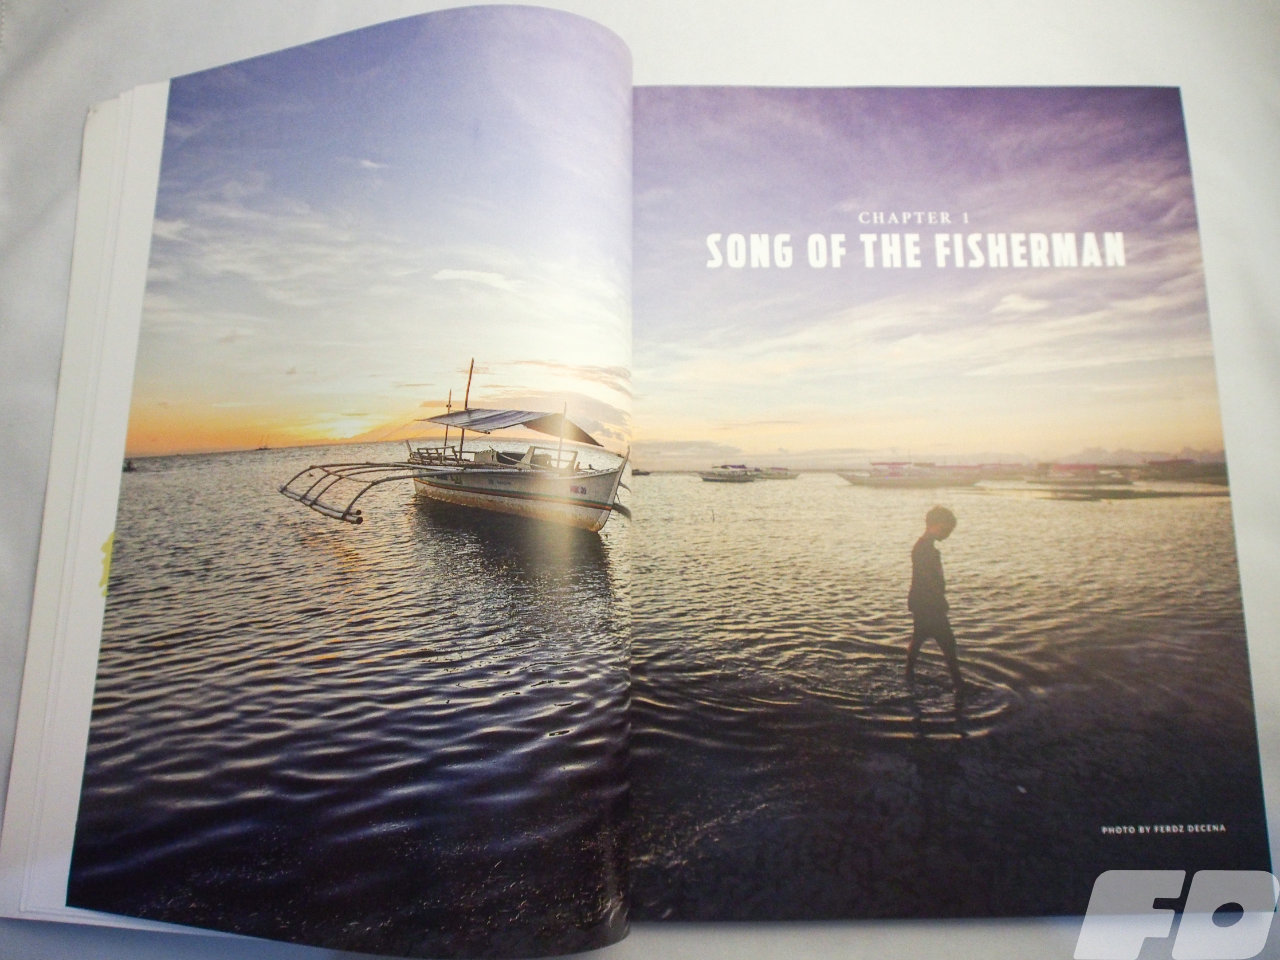 Images of Tañon Strait coffee table book